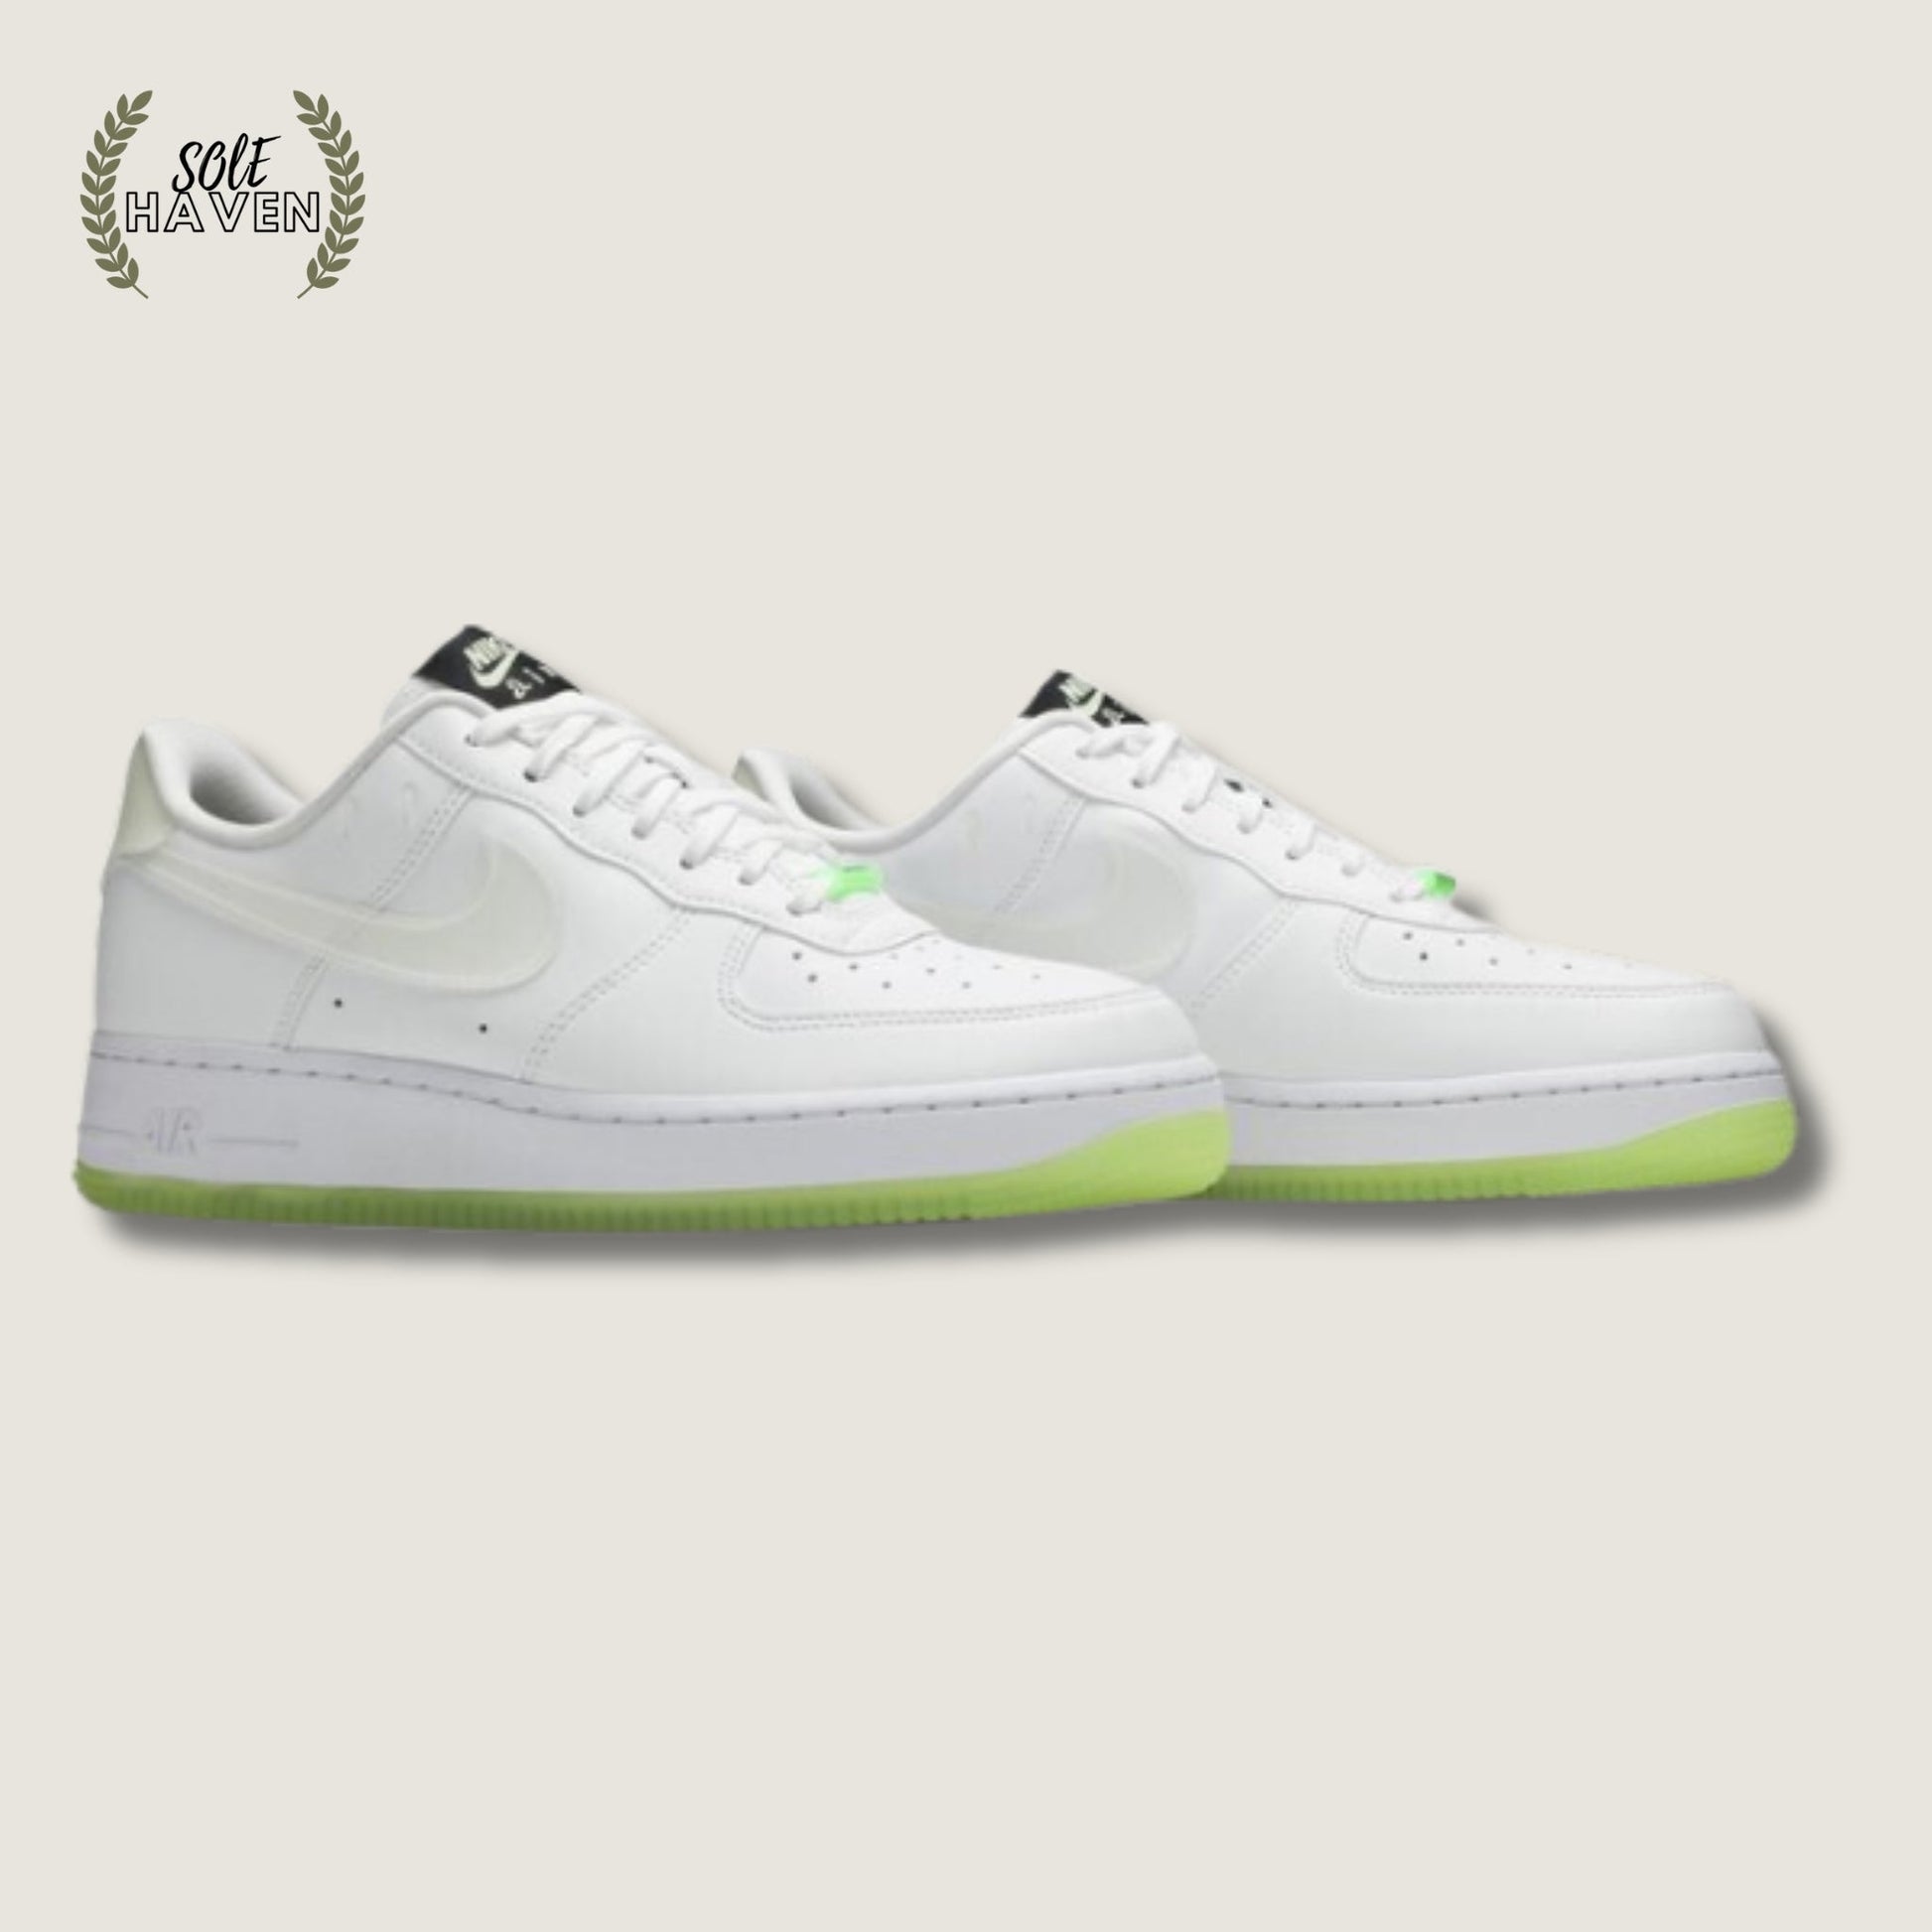 Air Force 1 '07 LX 'Have A Nike Day' - Sole HavenShoesNike